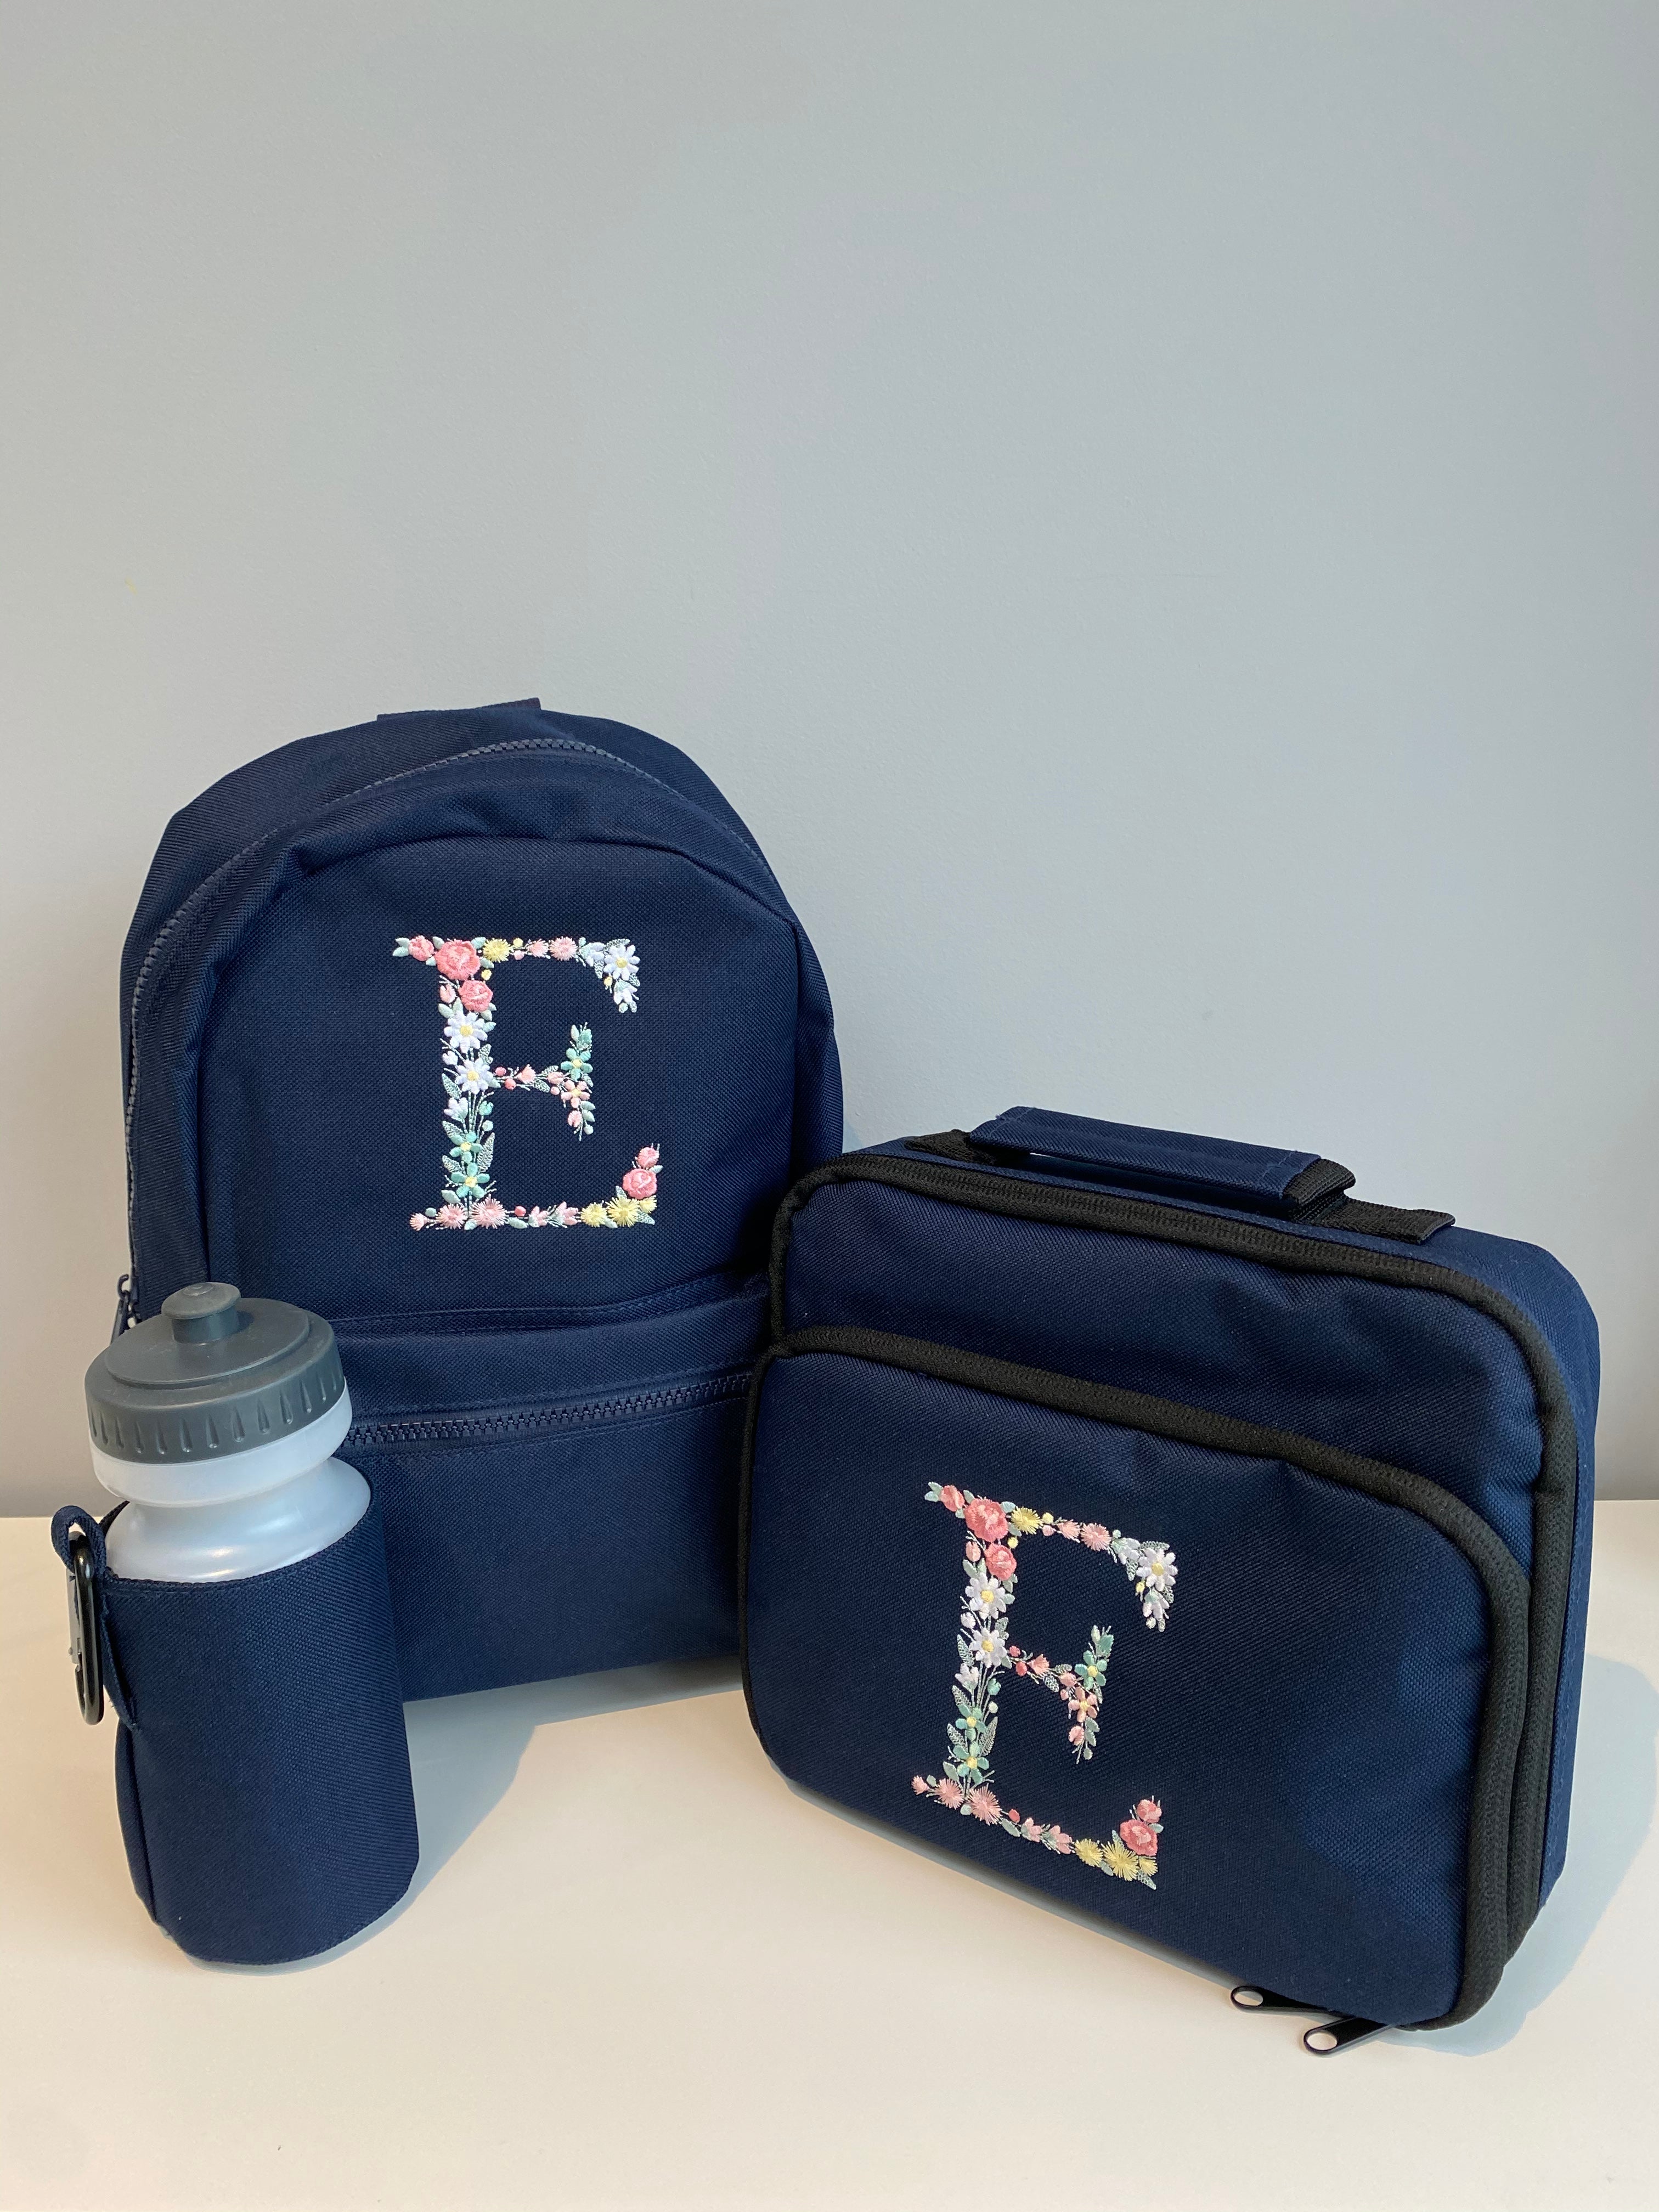 Floral Initial Lunch Cooler